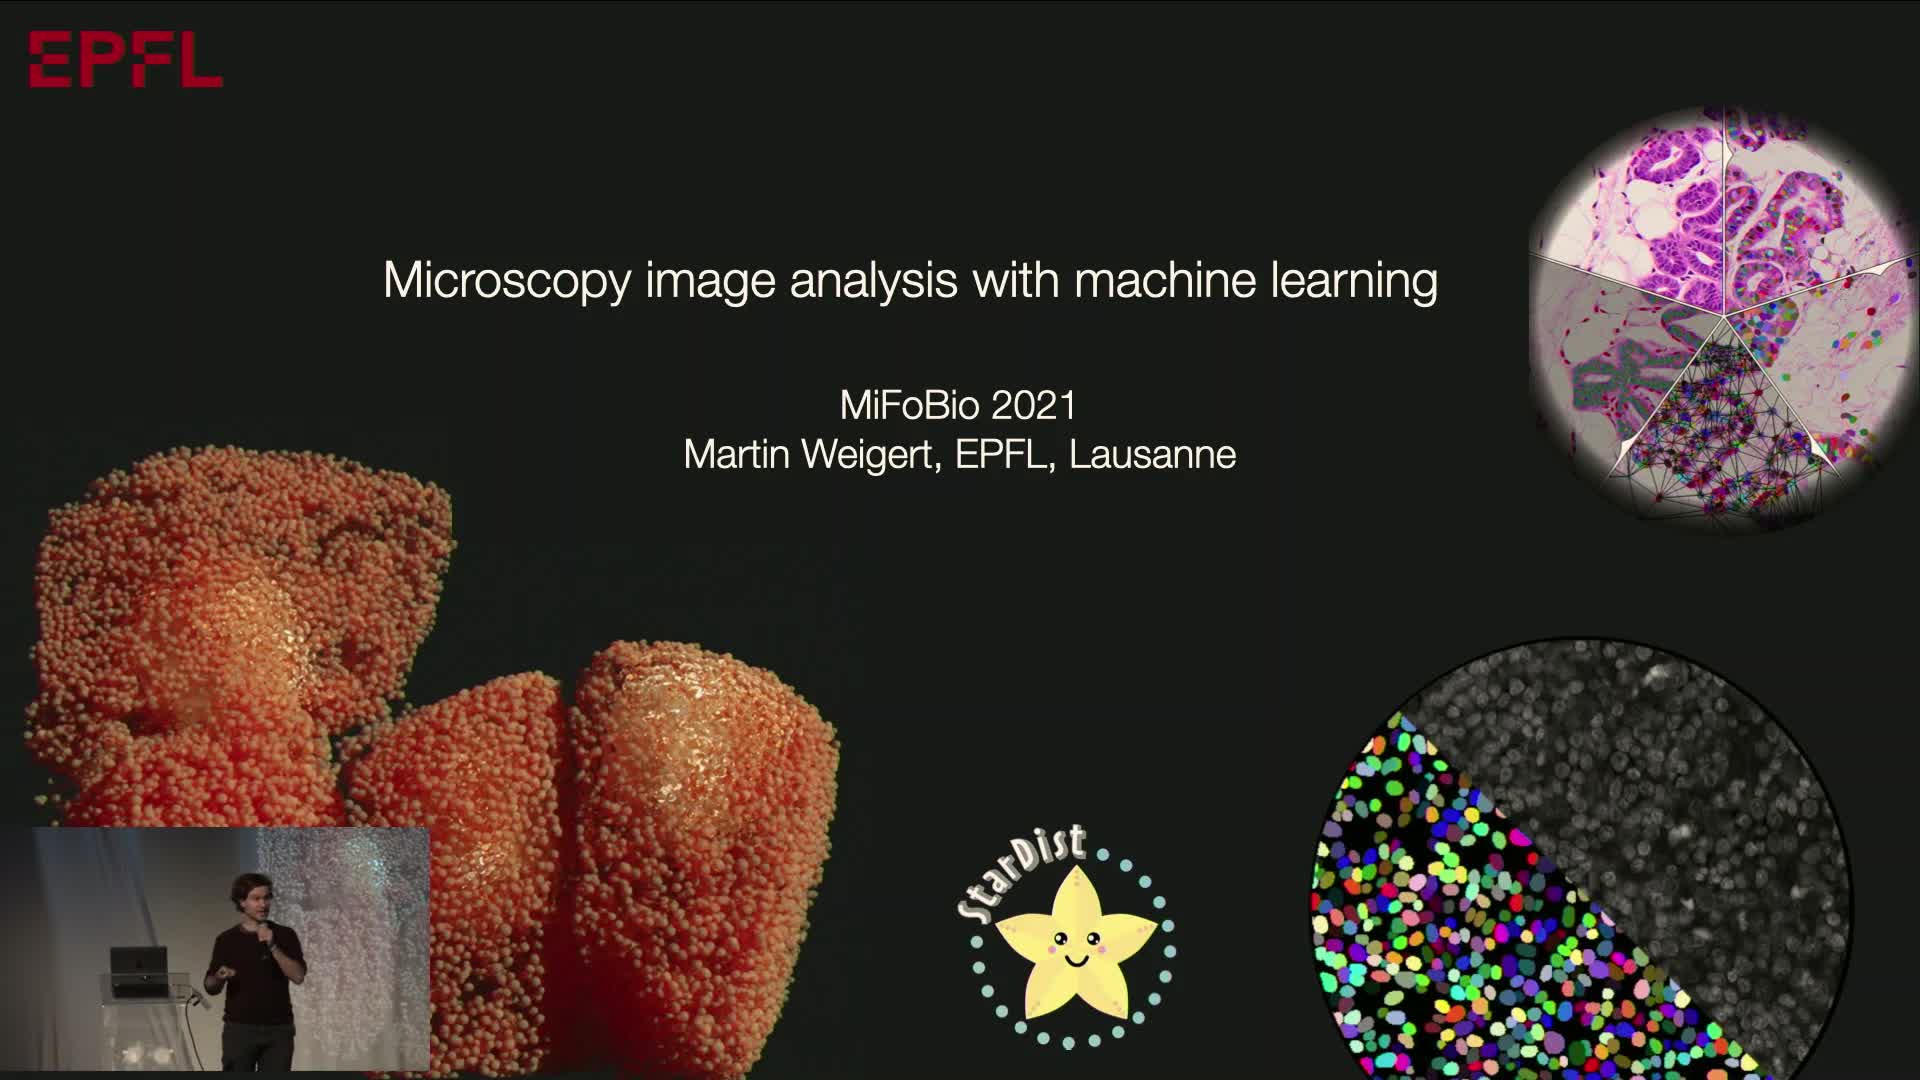 Microscopy image analysis with machine learning - Martin Weigert